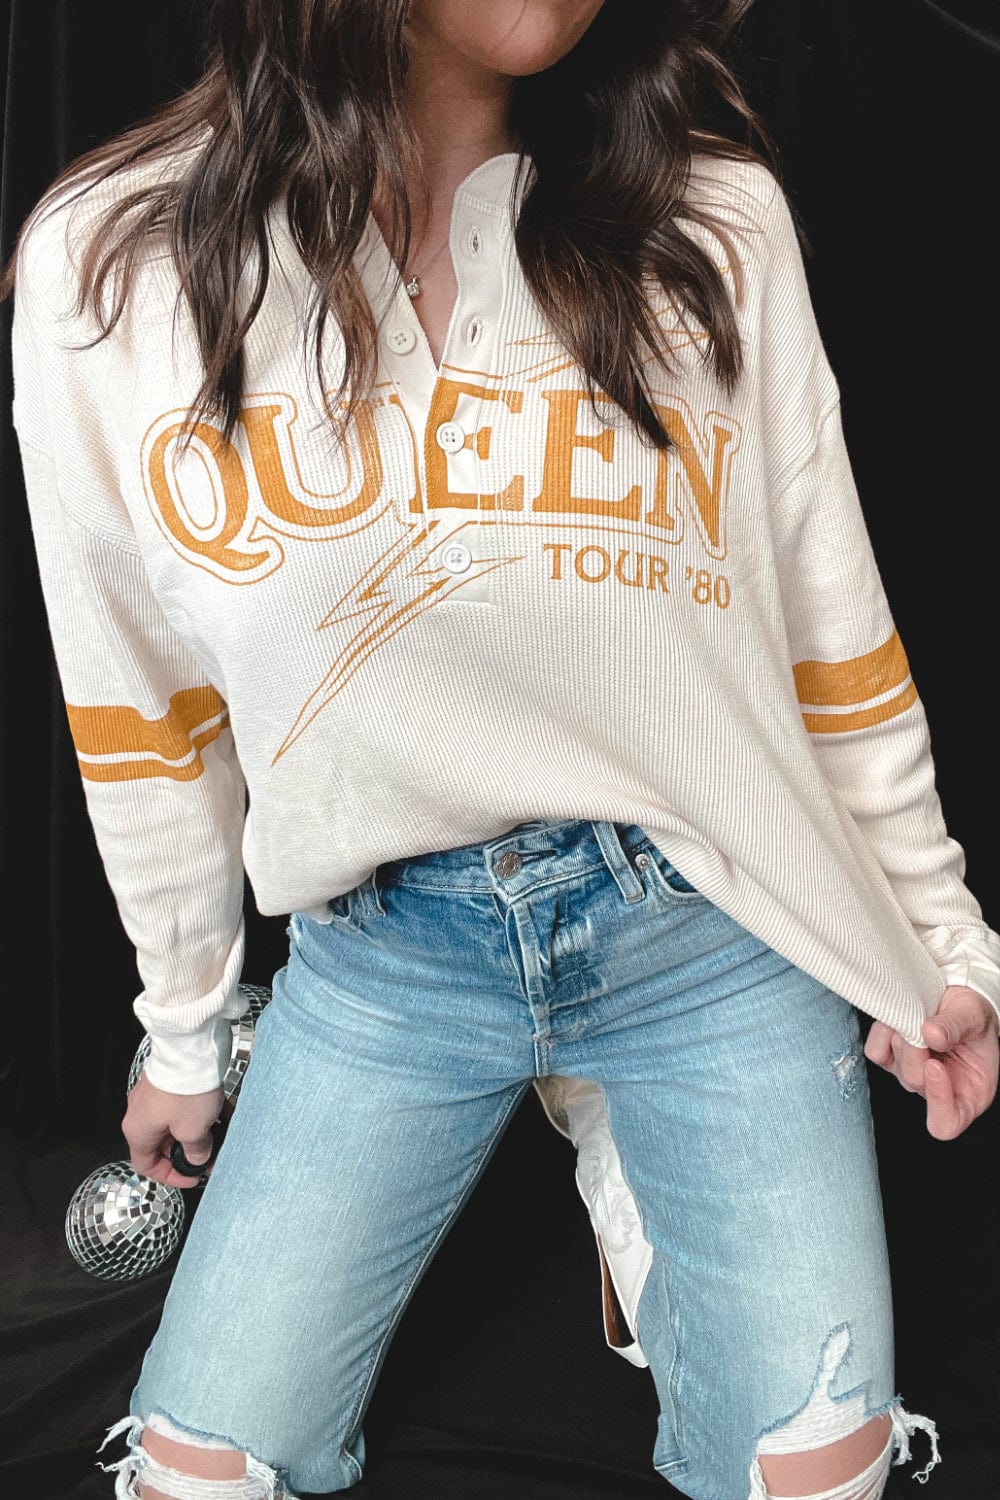 DAYDREAMER Queen Tour '80 Thermal Long Sleeve Henley in Dirty White - Graphic Tee - Blooming Daily